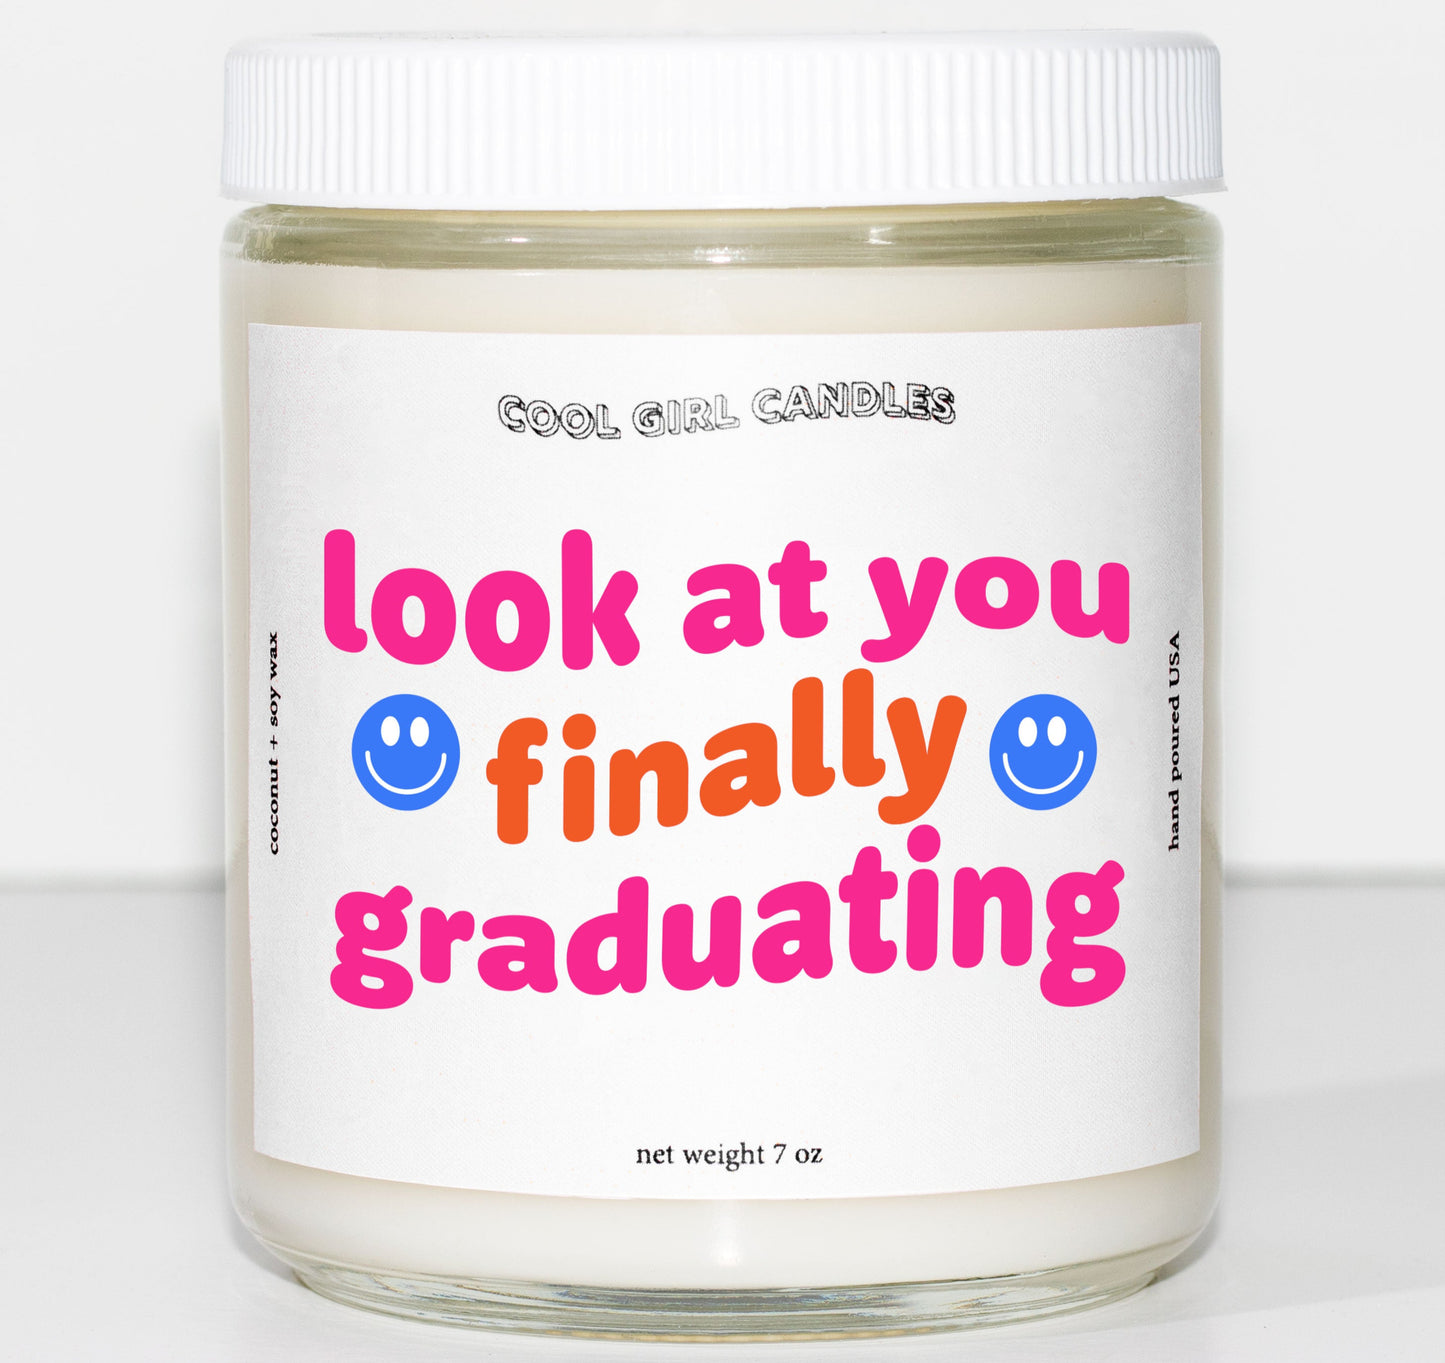 Look at you finally graduating candle for a funny graduation gift. Perfect for high school and college graduation!